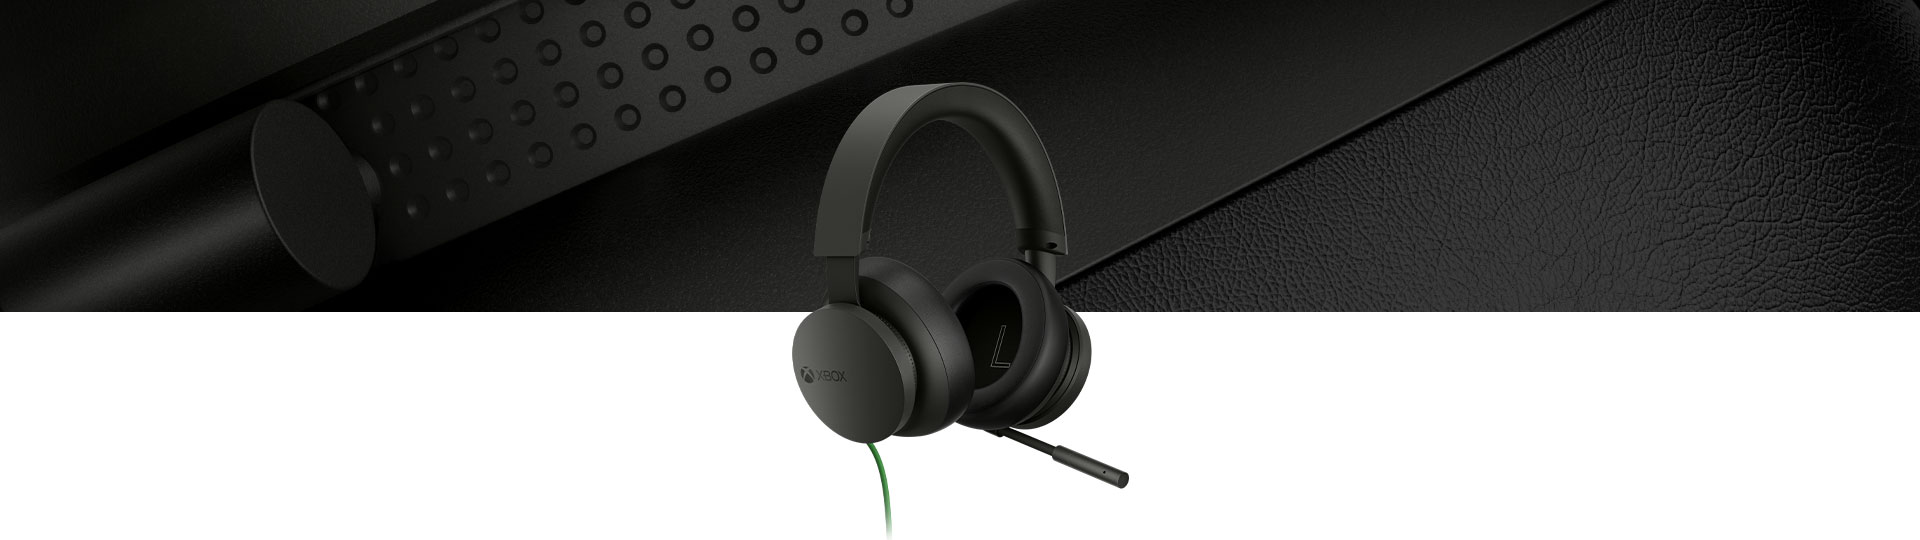 Xbox Stereo headset with a close-up of the headset in the background